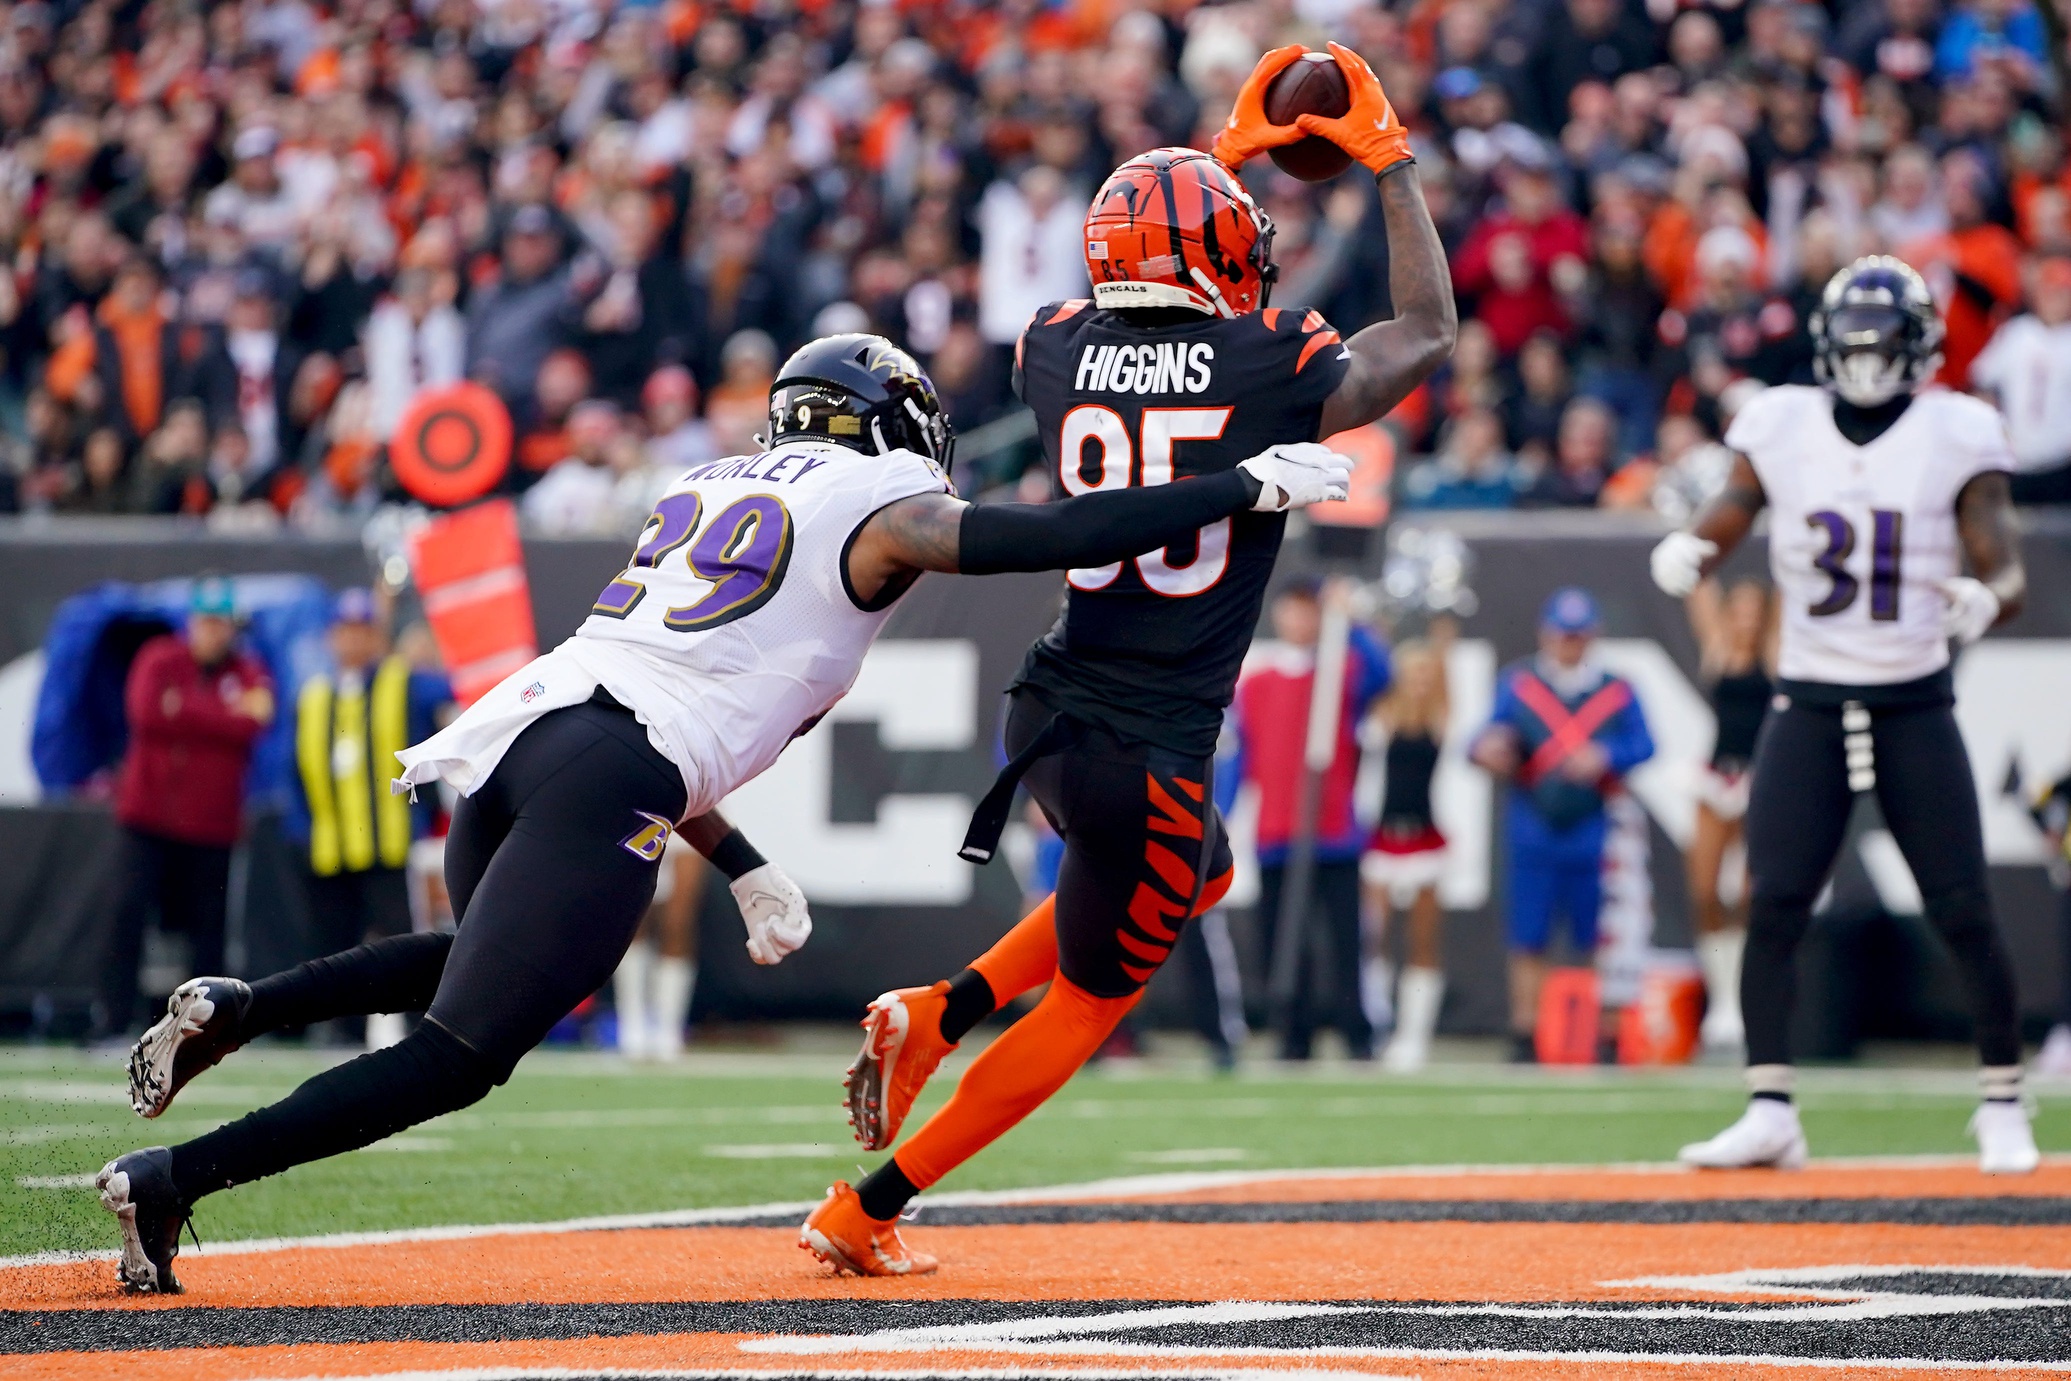 Bengals vs. Ravens Week 5 Preview and Prediction